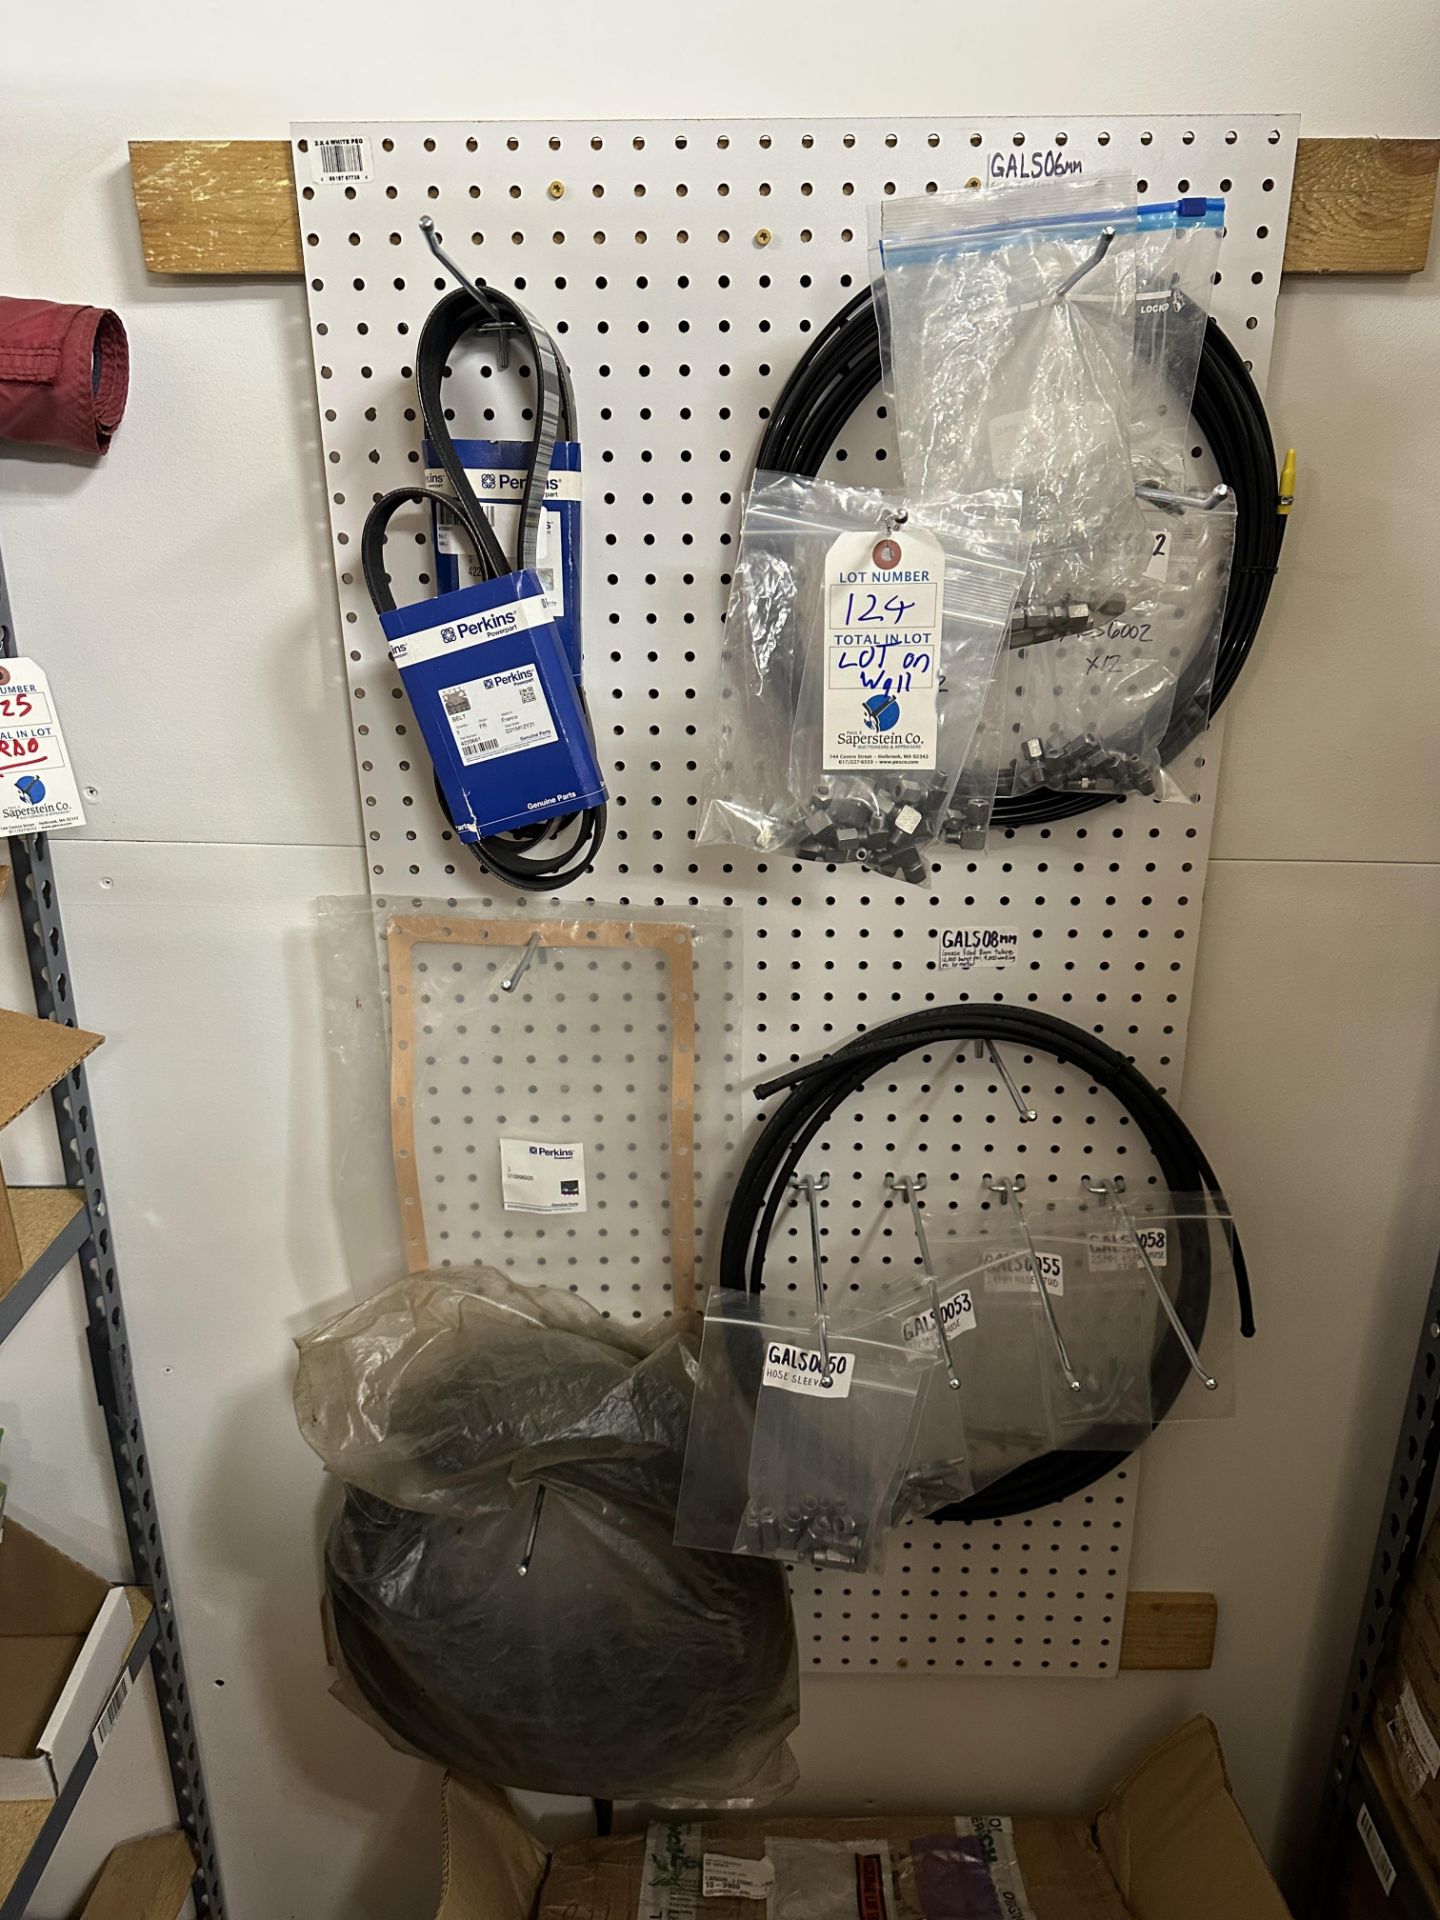 {LOT} On Pegboard - Asst. Grease Application Accessories